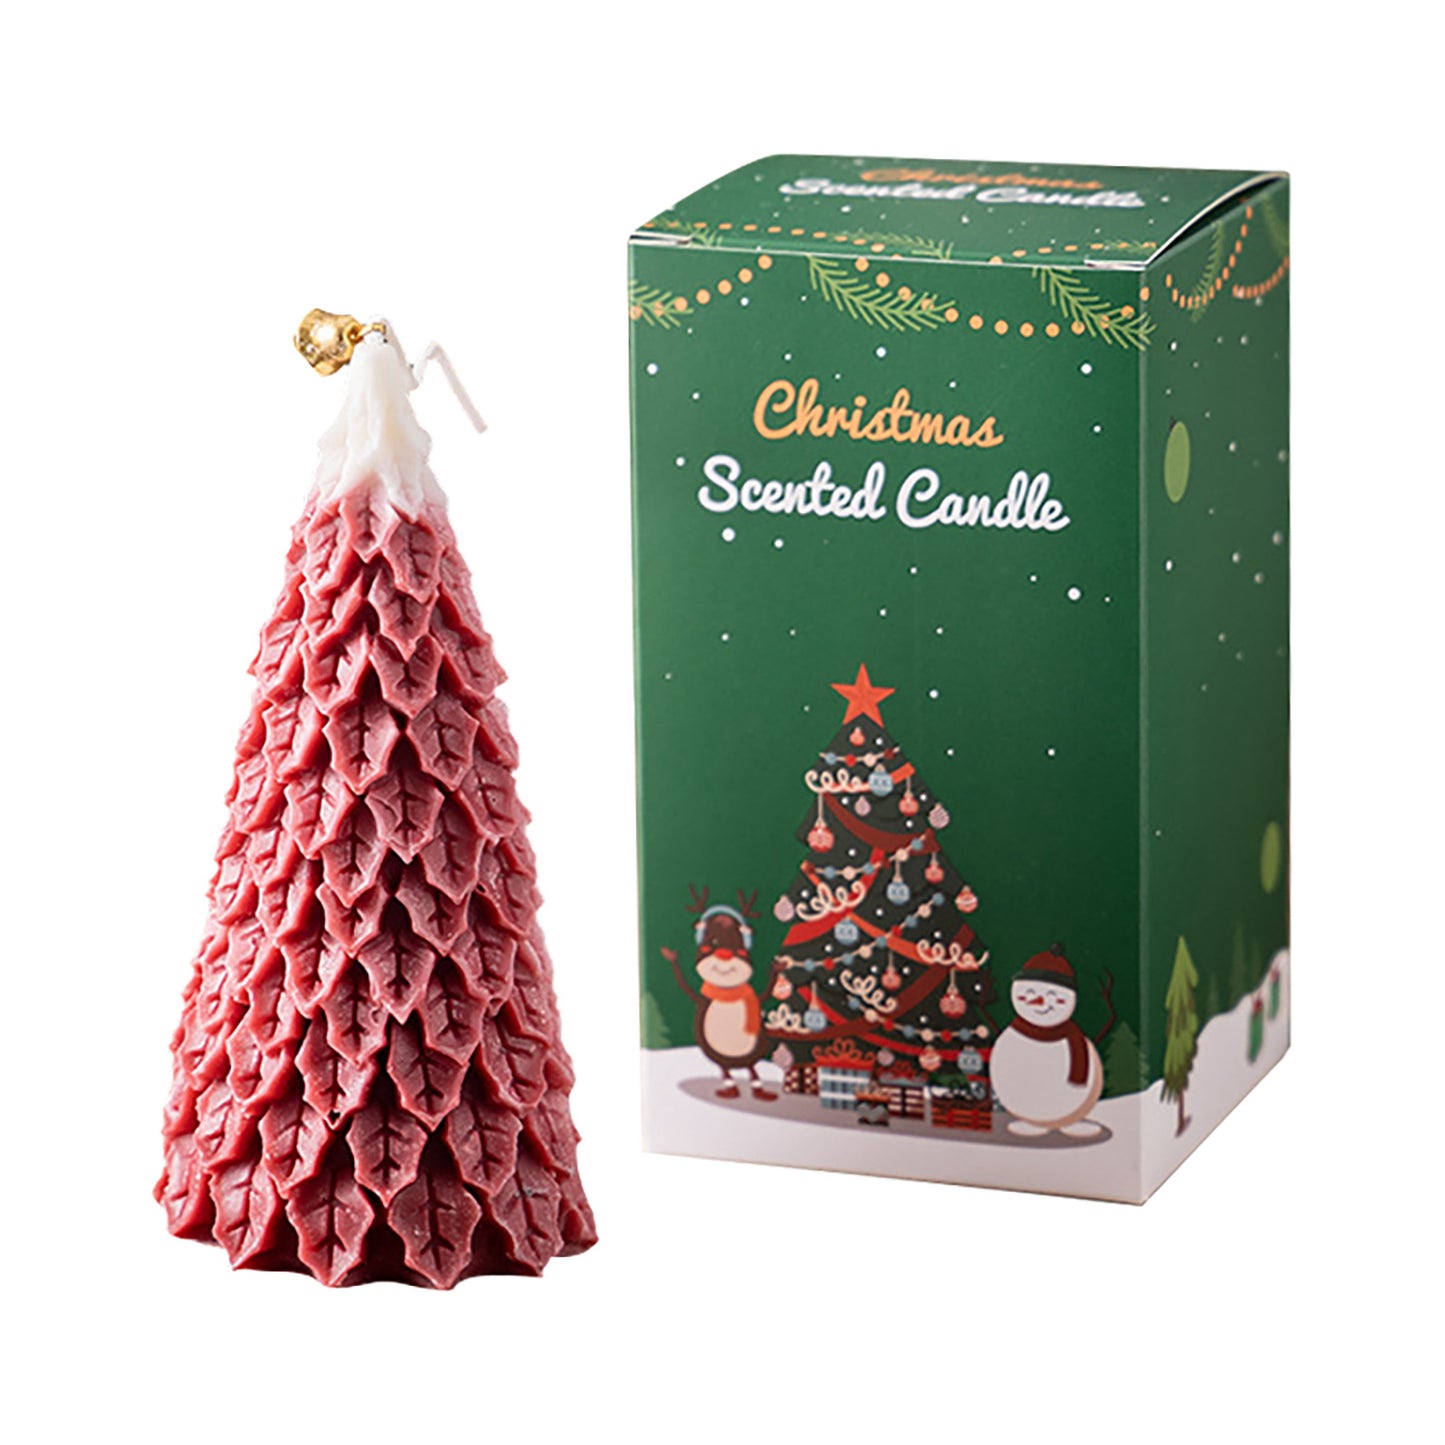 Christmas scented candle gifts, Christmas tree scented candles